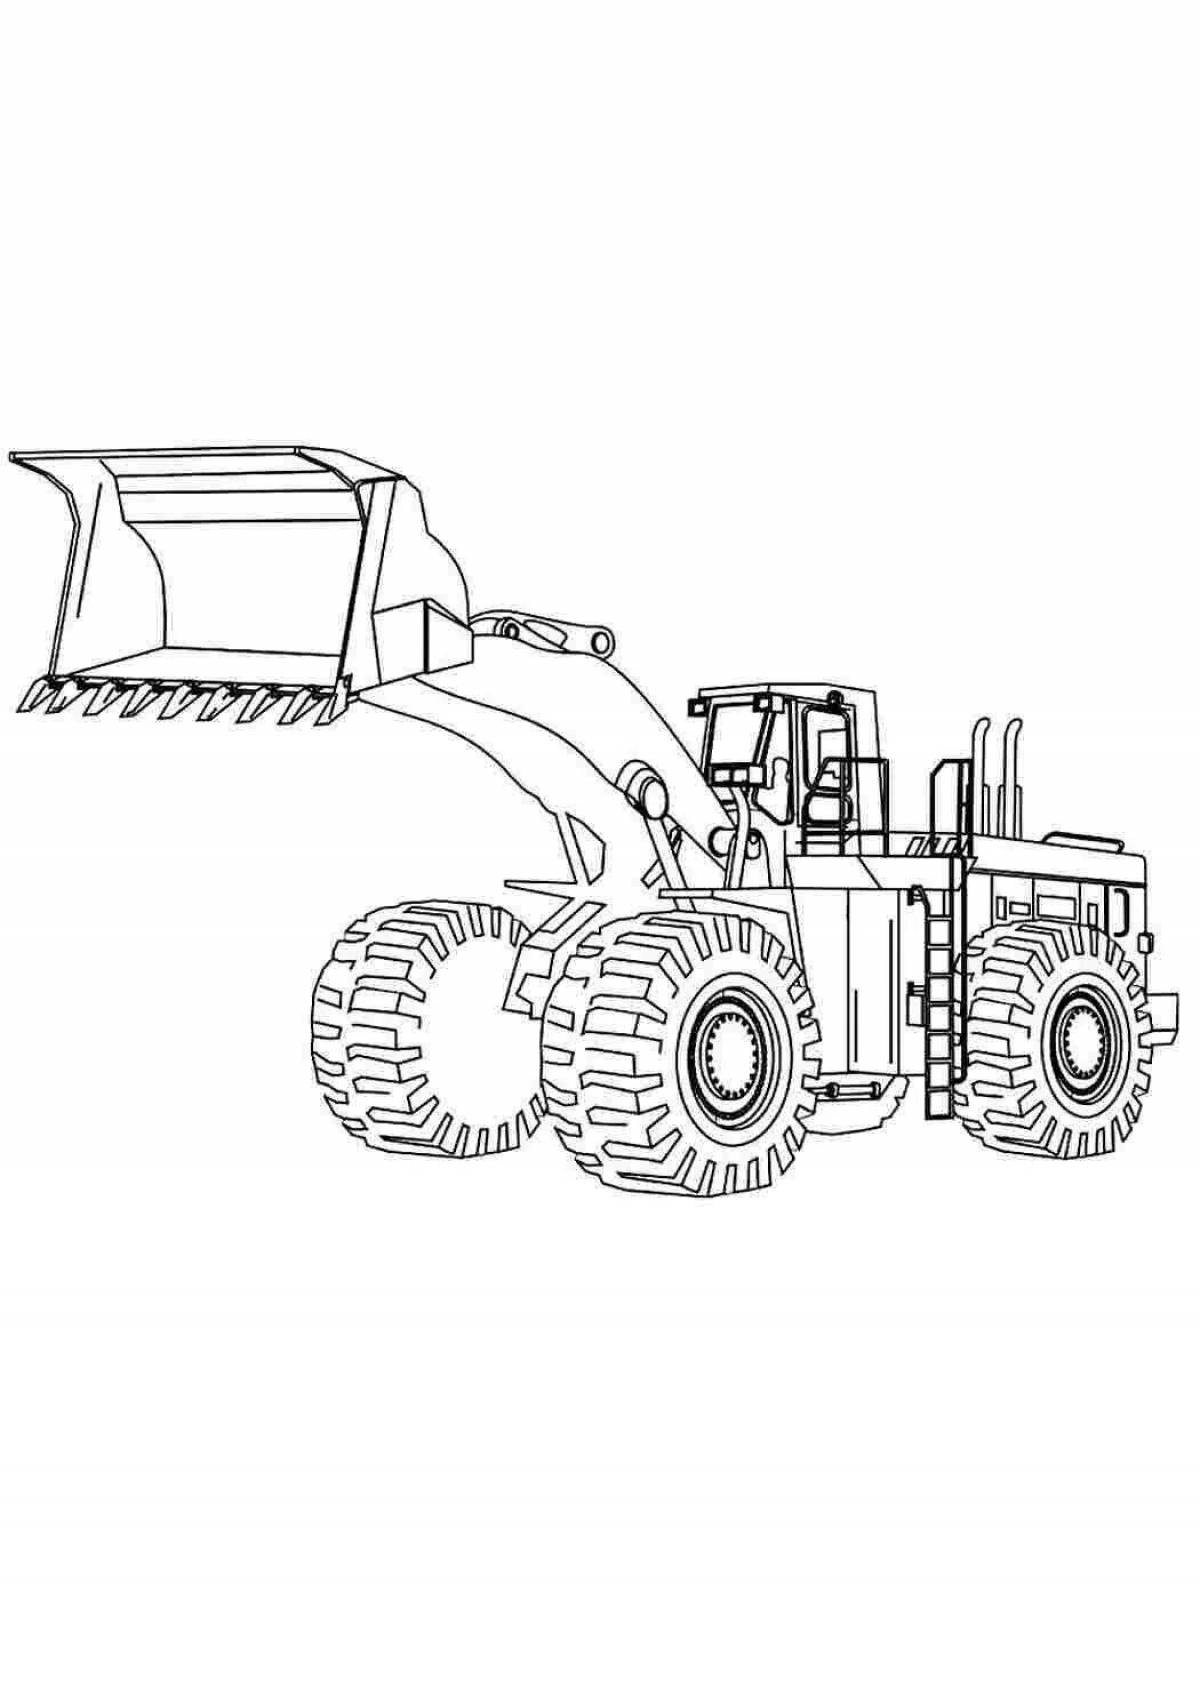 Adorable tractor coloring page